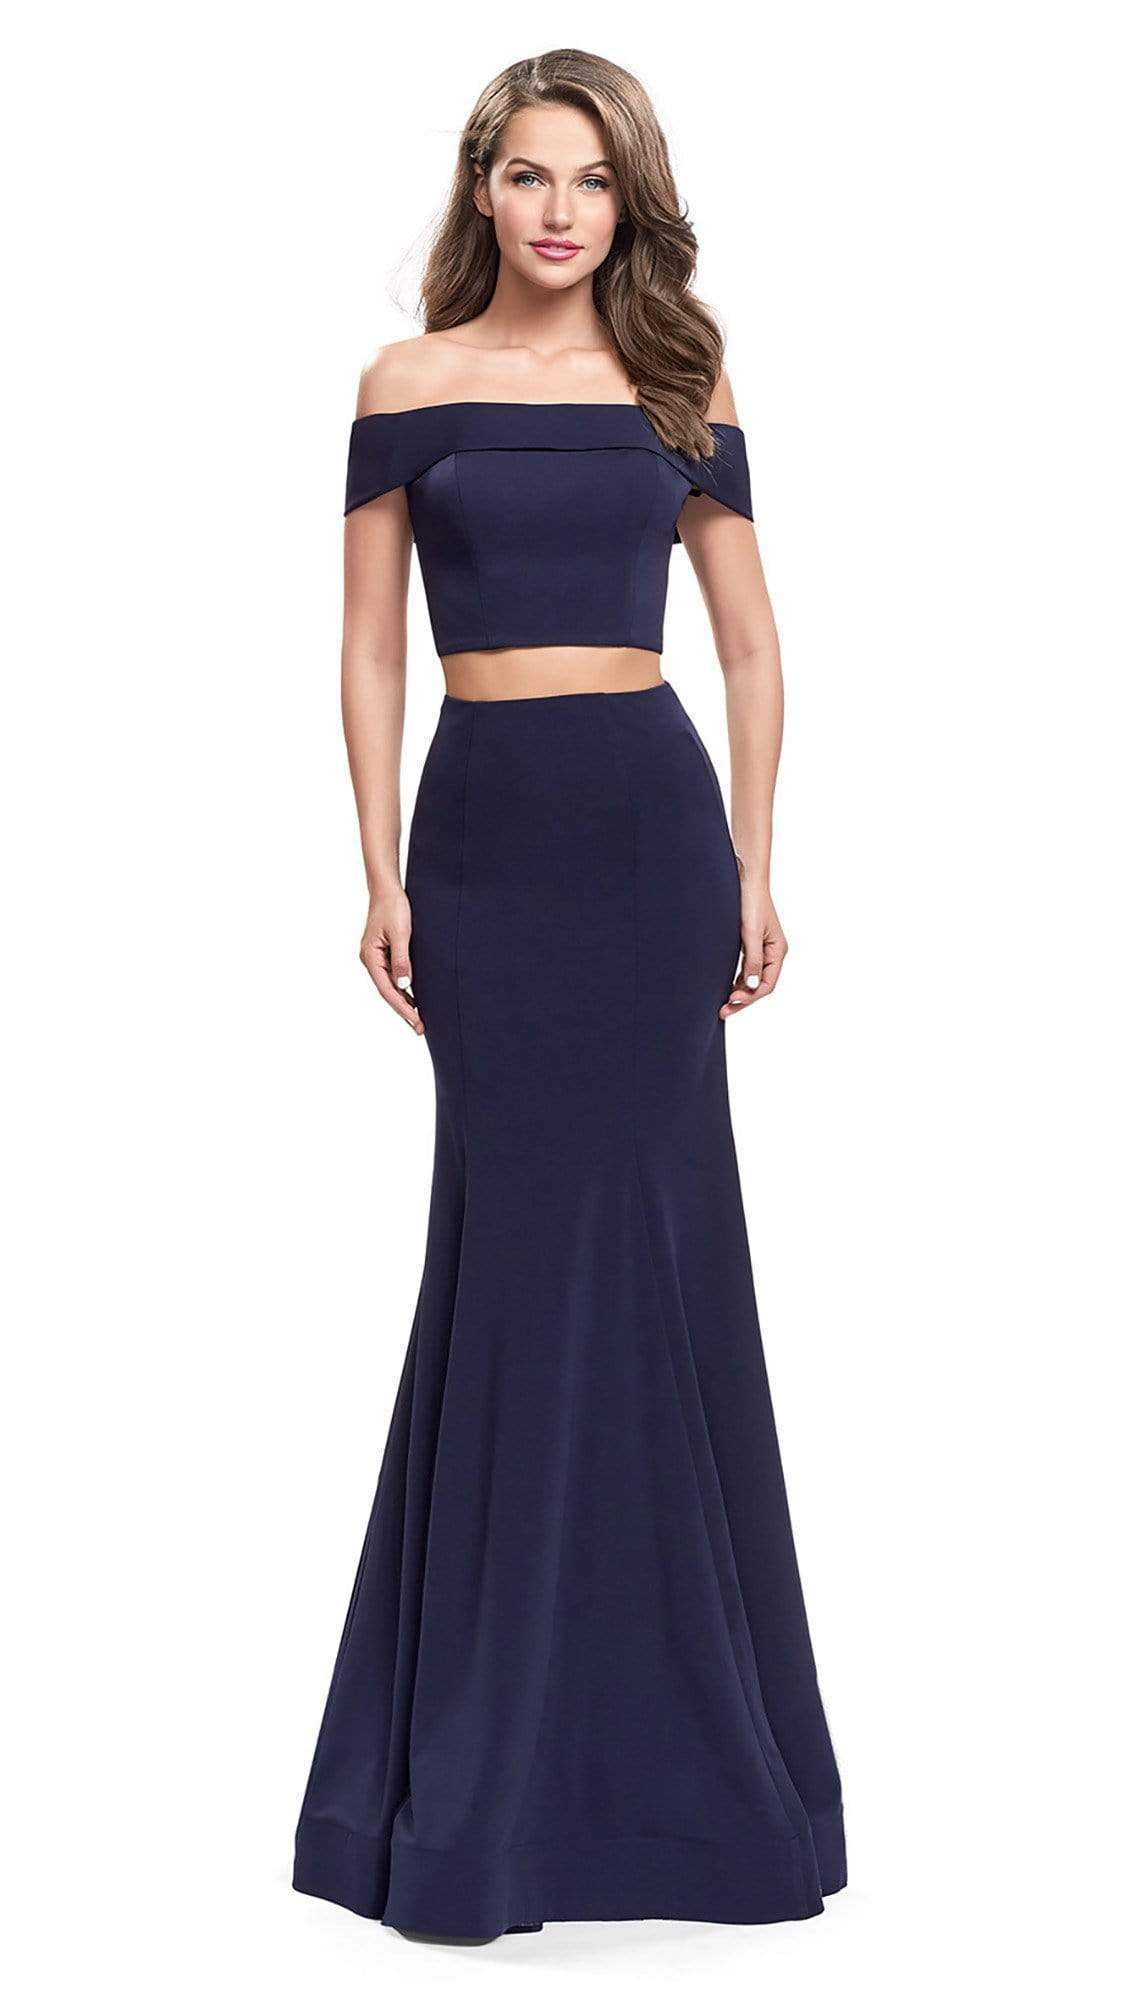 Image of La Femme - 25578 Two-Piece Fold-Over Off Shoulder Jersey Gown